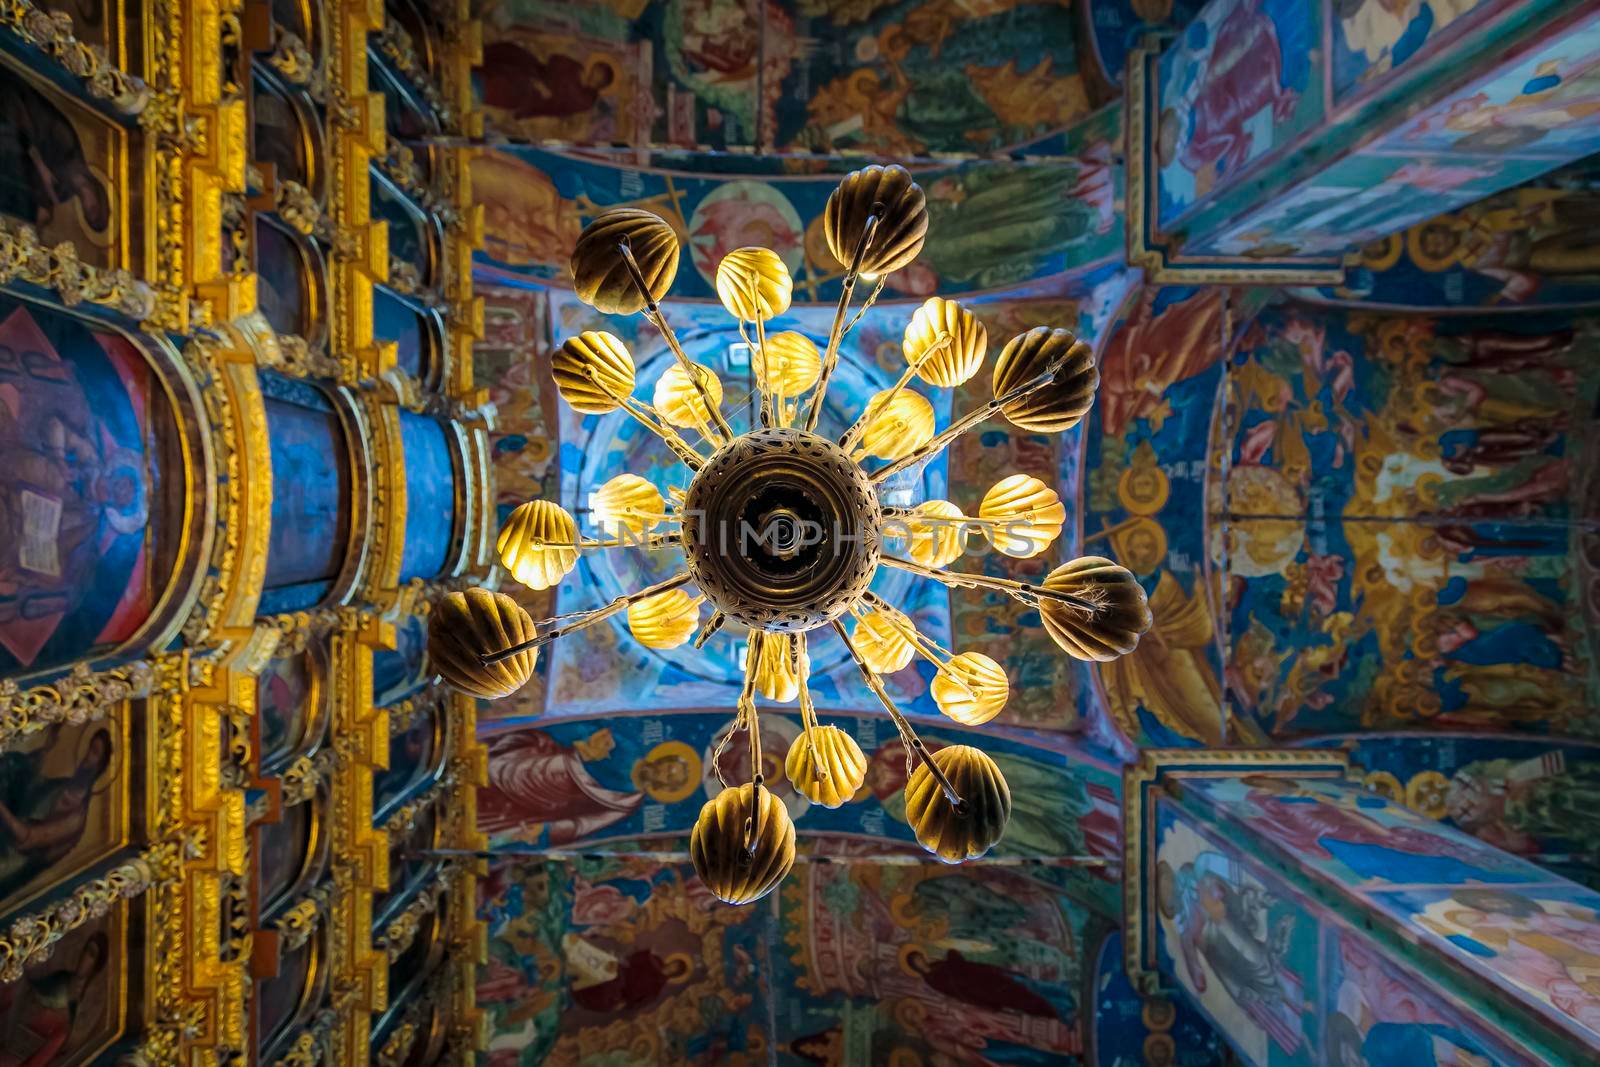 Church of Elijah the Prophet in Yaroslavl 11.07.2019. a high-hanging chandelier on the background of walls with painted icons of saints.